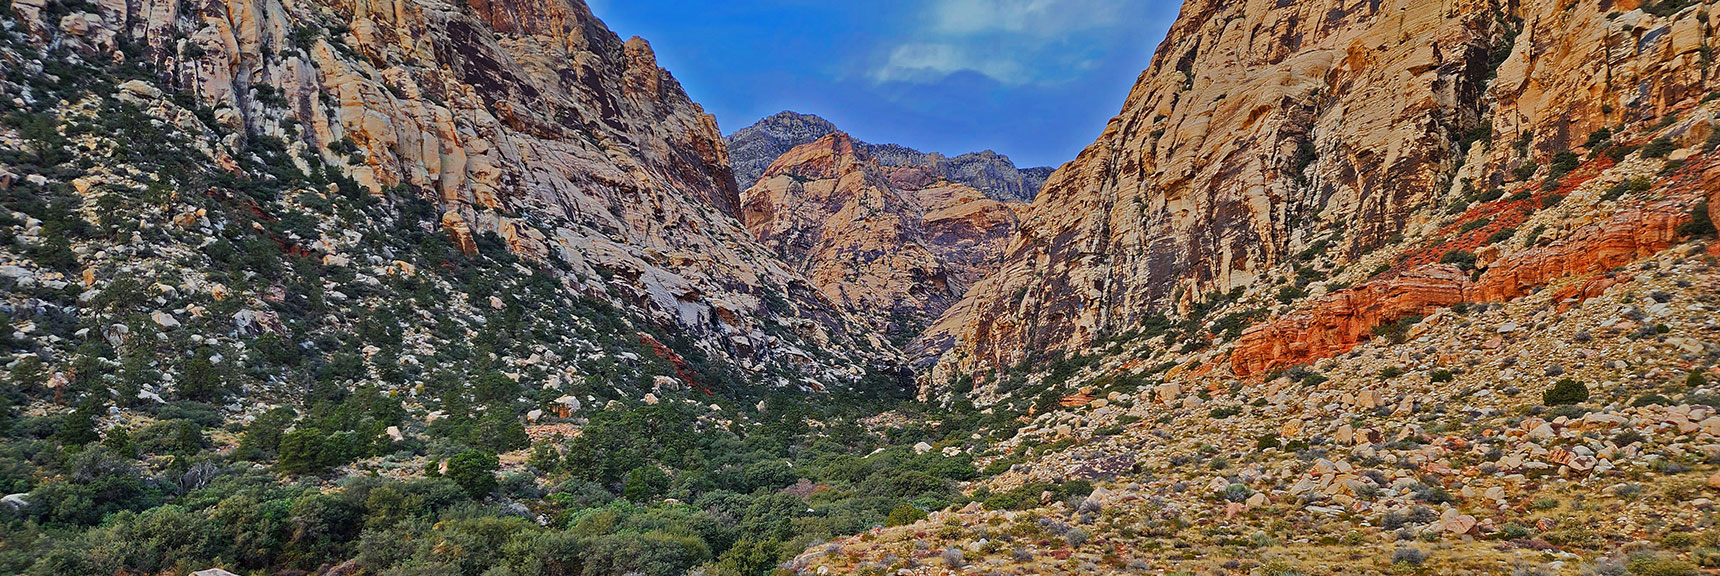 The Canyon Will Divide into a North (right) and South (left) Branch at the Hill in the Middle | Oak Creek Canyon North Branch Toward Rainbow Mountains Upper Crest Ridgeline | Rainbow Mountain Wilderness, Nevada